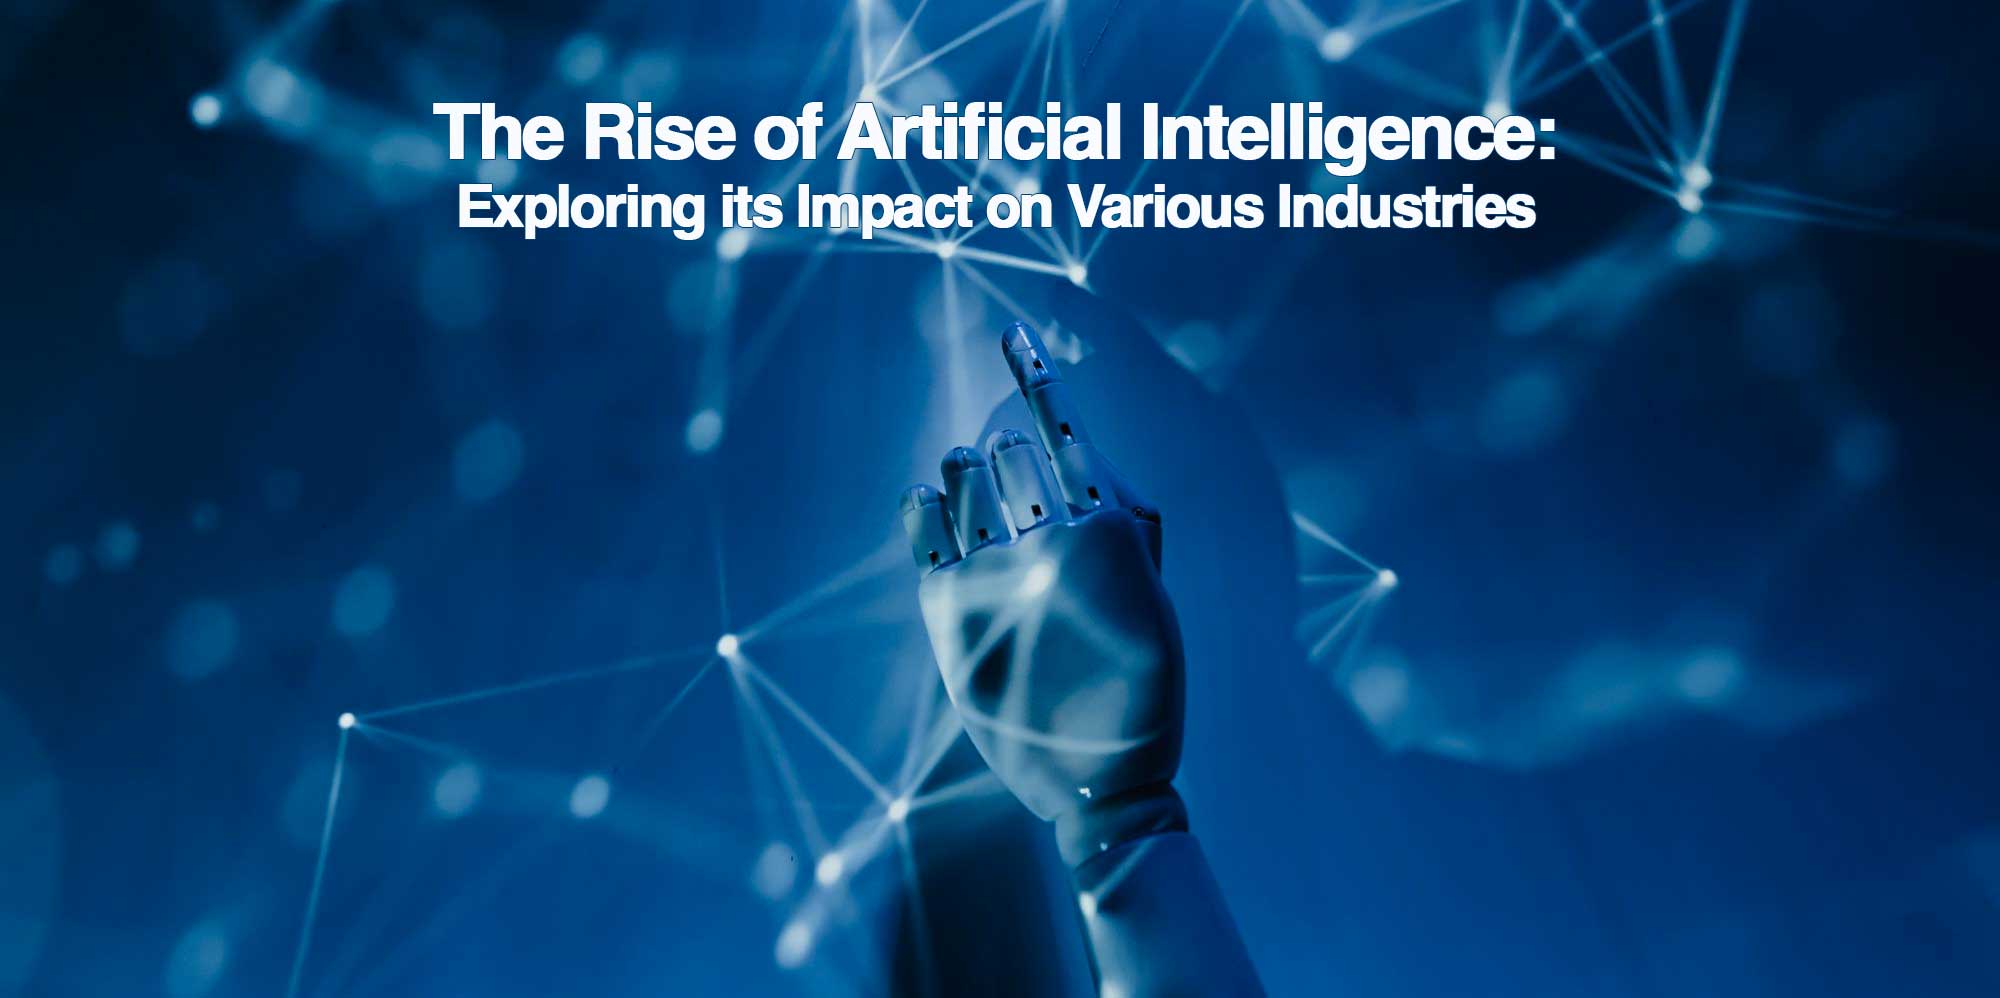 The Rise of Artificial Intelligence: Exploring its Impact on Various Industries